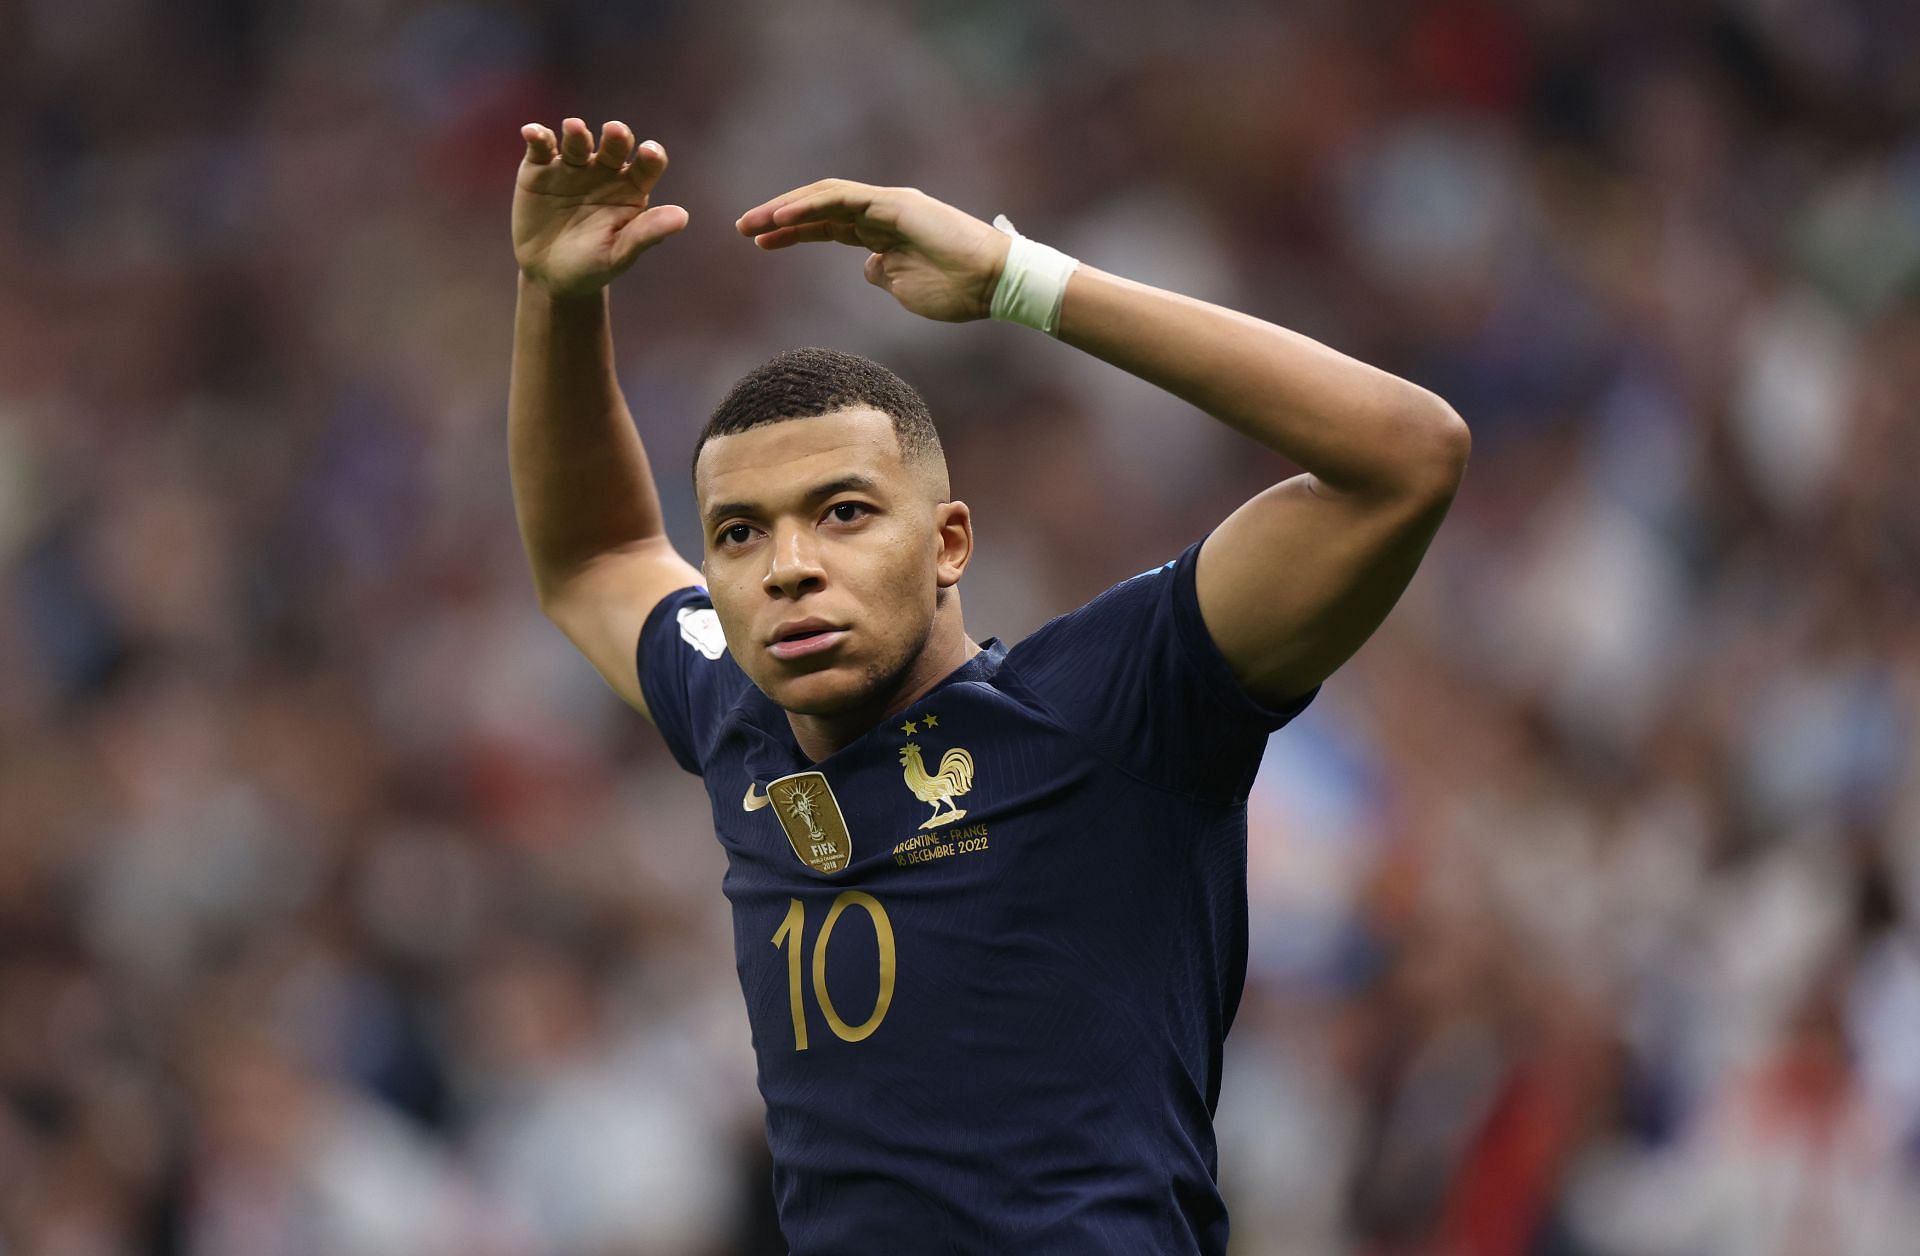 Kylian Mbappe, 24, is one of the youngest captains in international football.